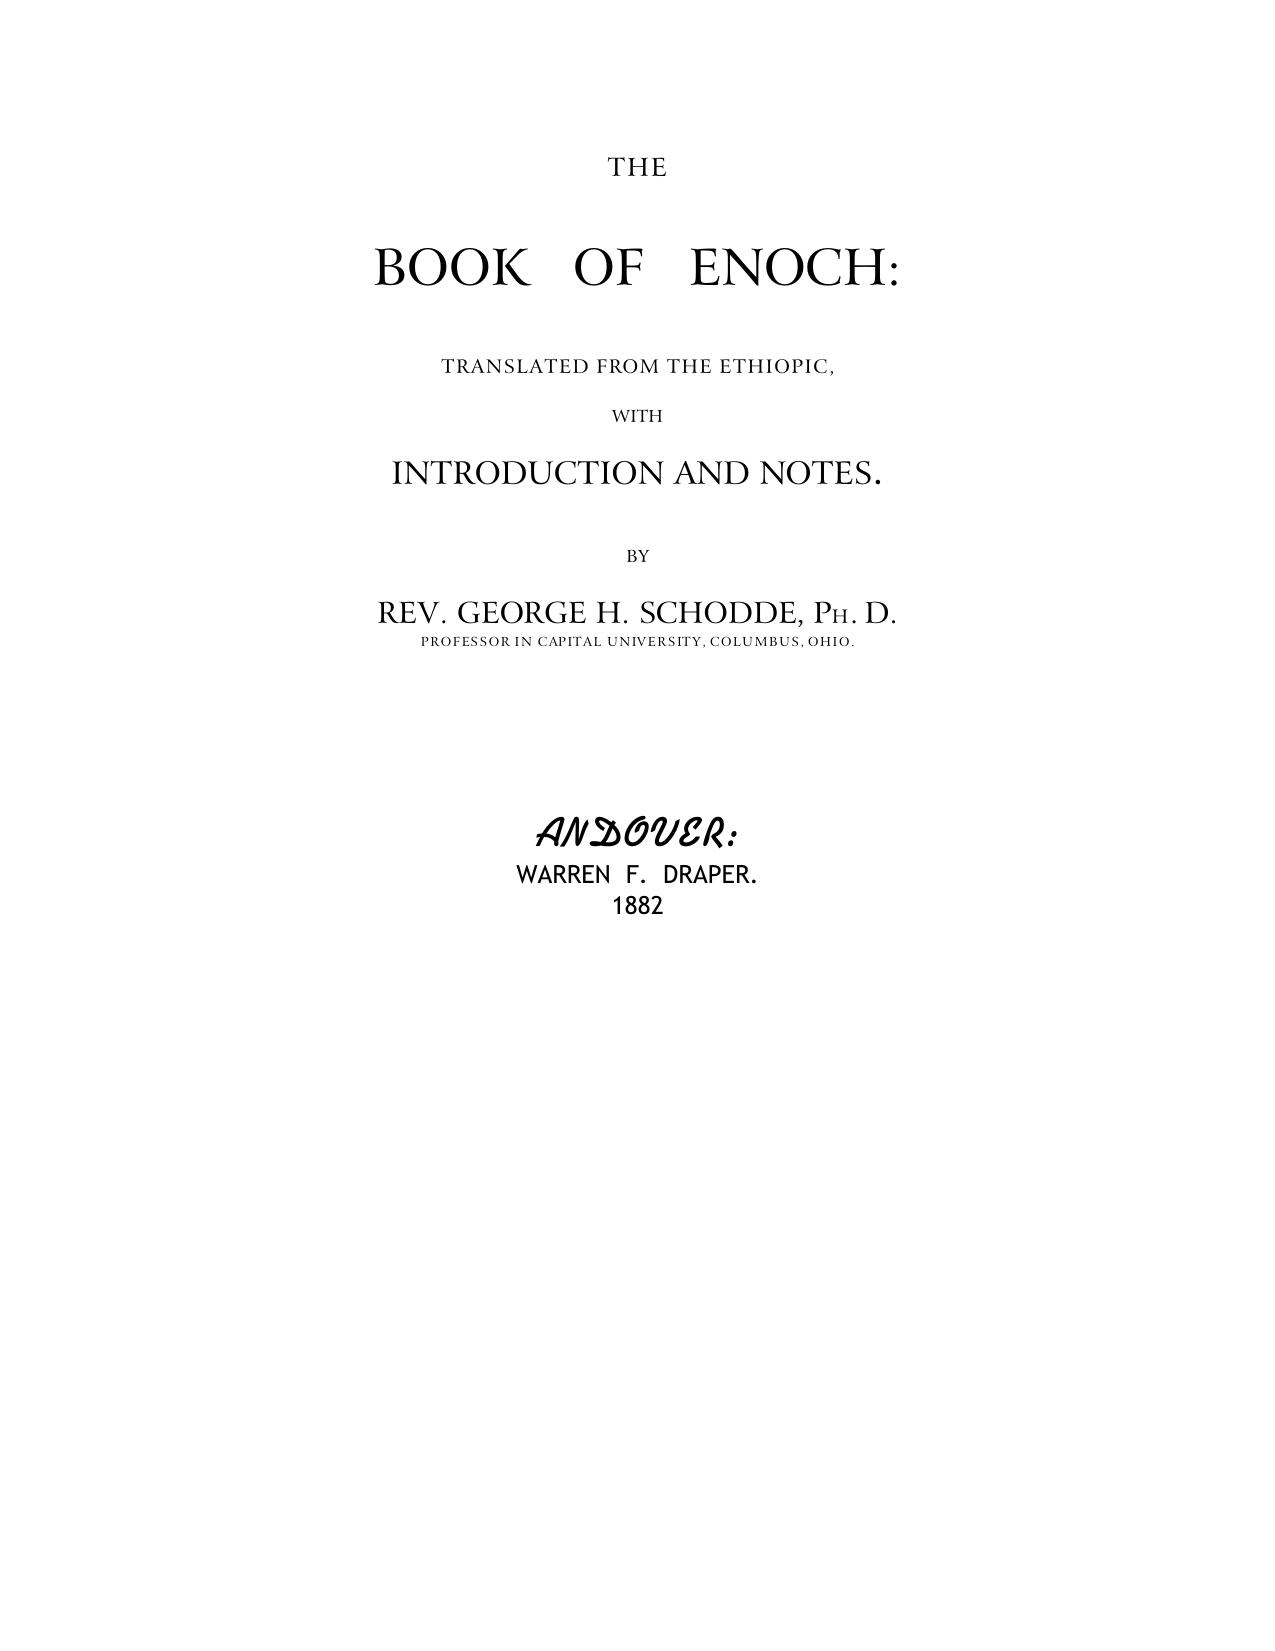 The Book of Enoch Translated From the Ethiopic, With Introduction and Notes